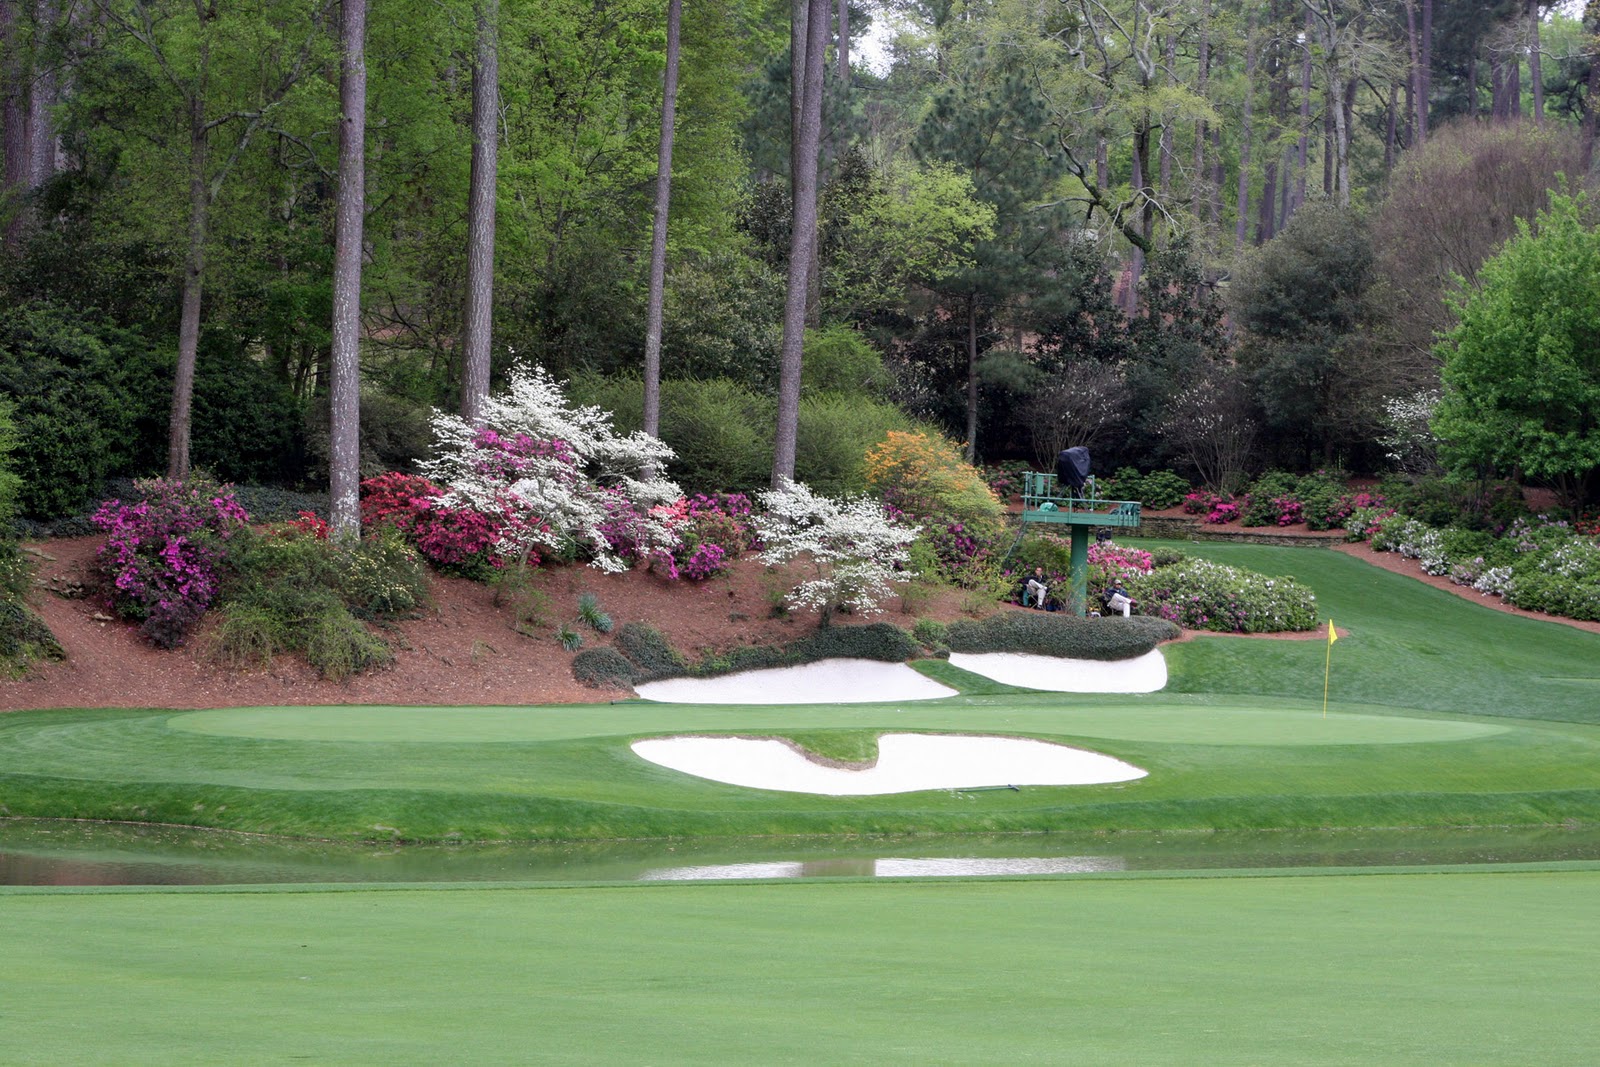 Augusta National 12th Hole Wallpaper Picswallpaper